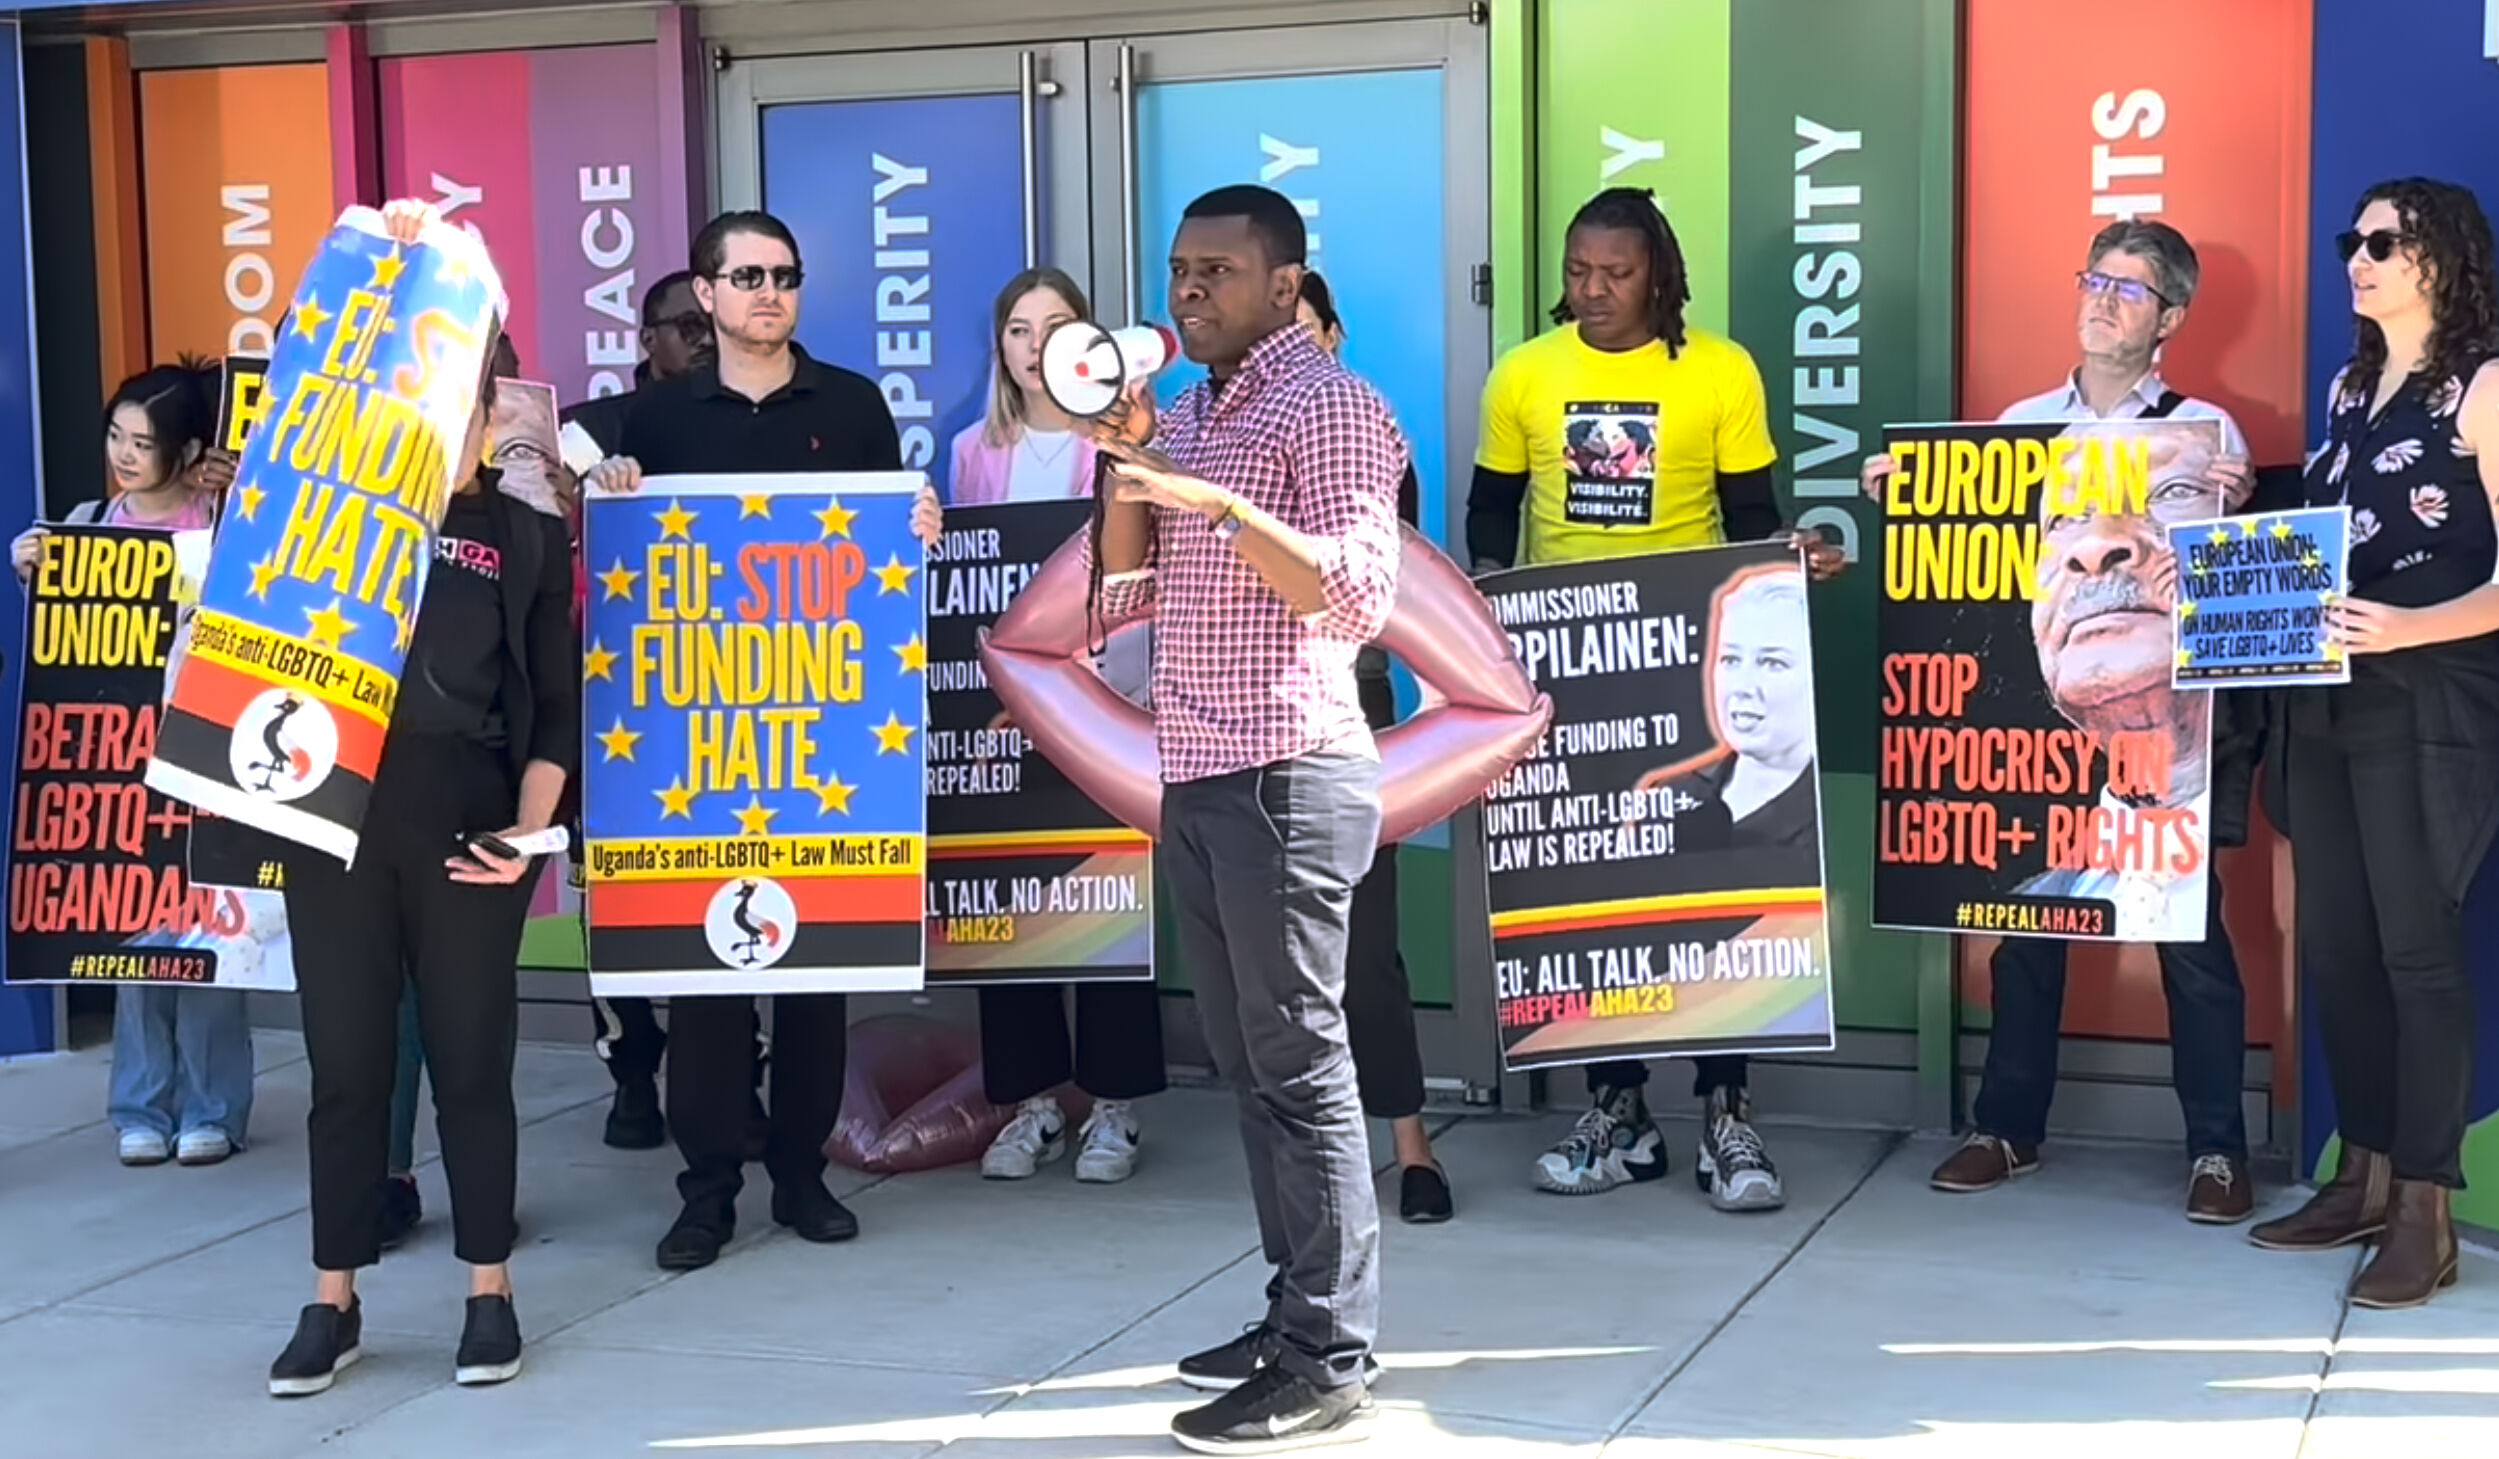 Activist Hillary Innocent Taylor Seguya addresses protesters outside the European Union Delegation to the U.S. in Washington, D.C.